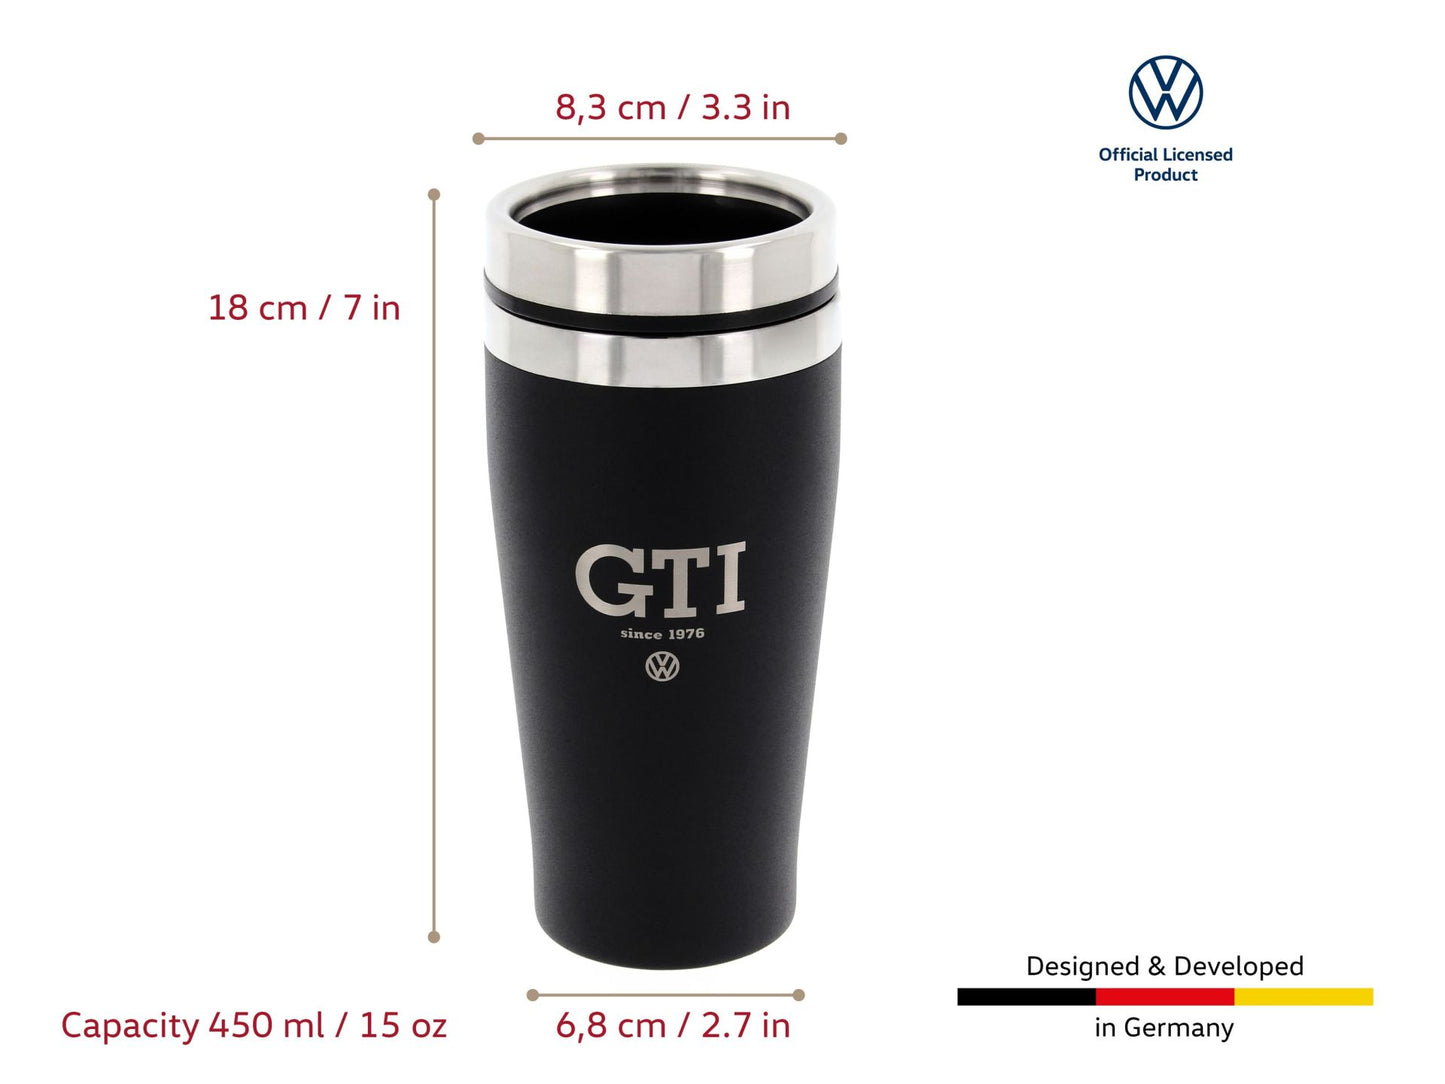 Gobelet thermos isotherme GTI